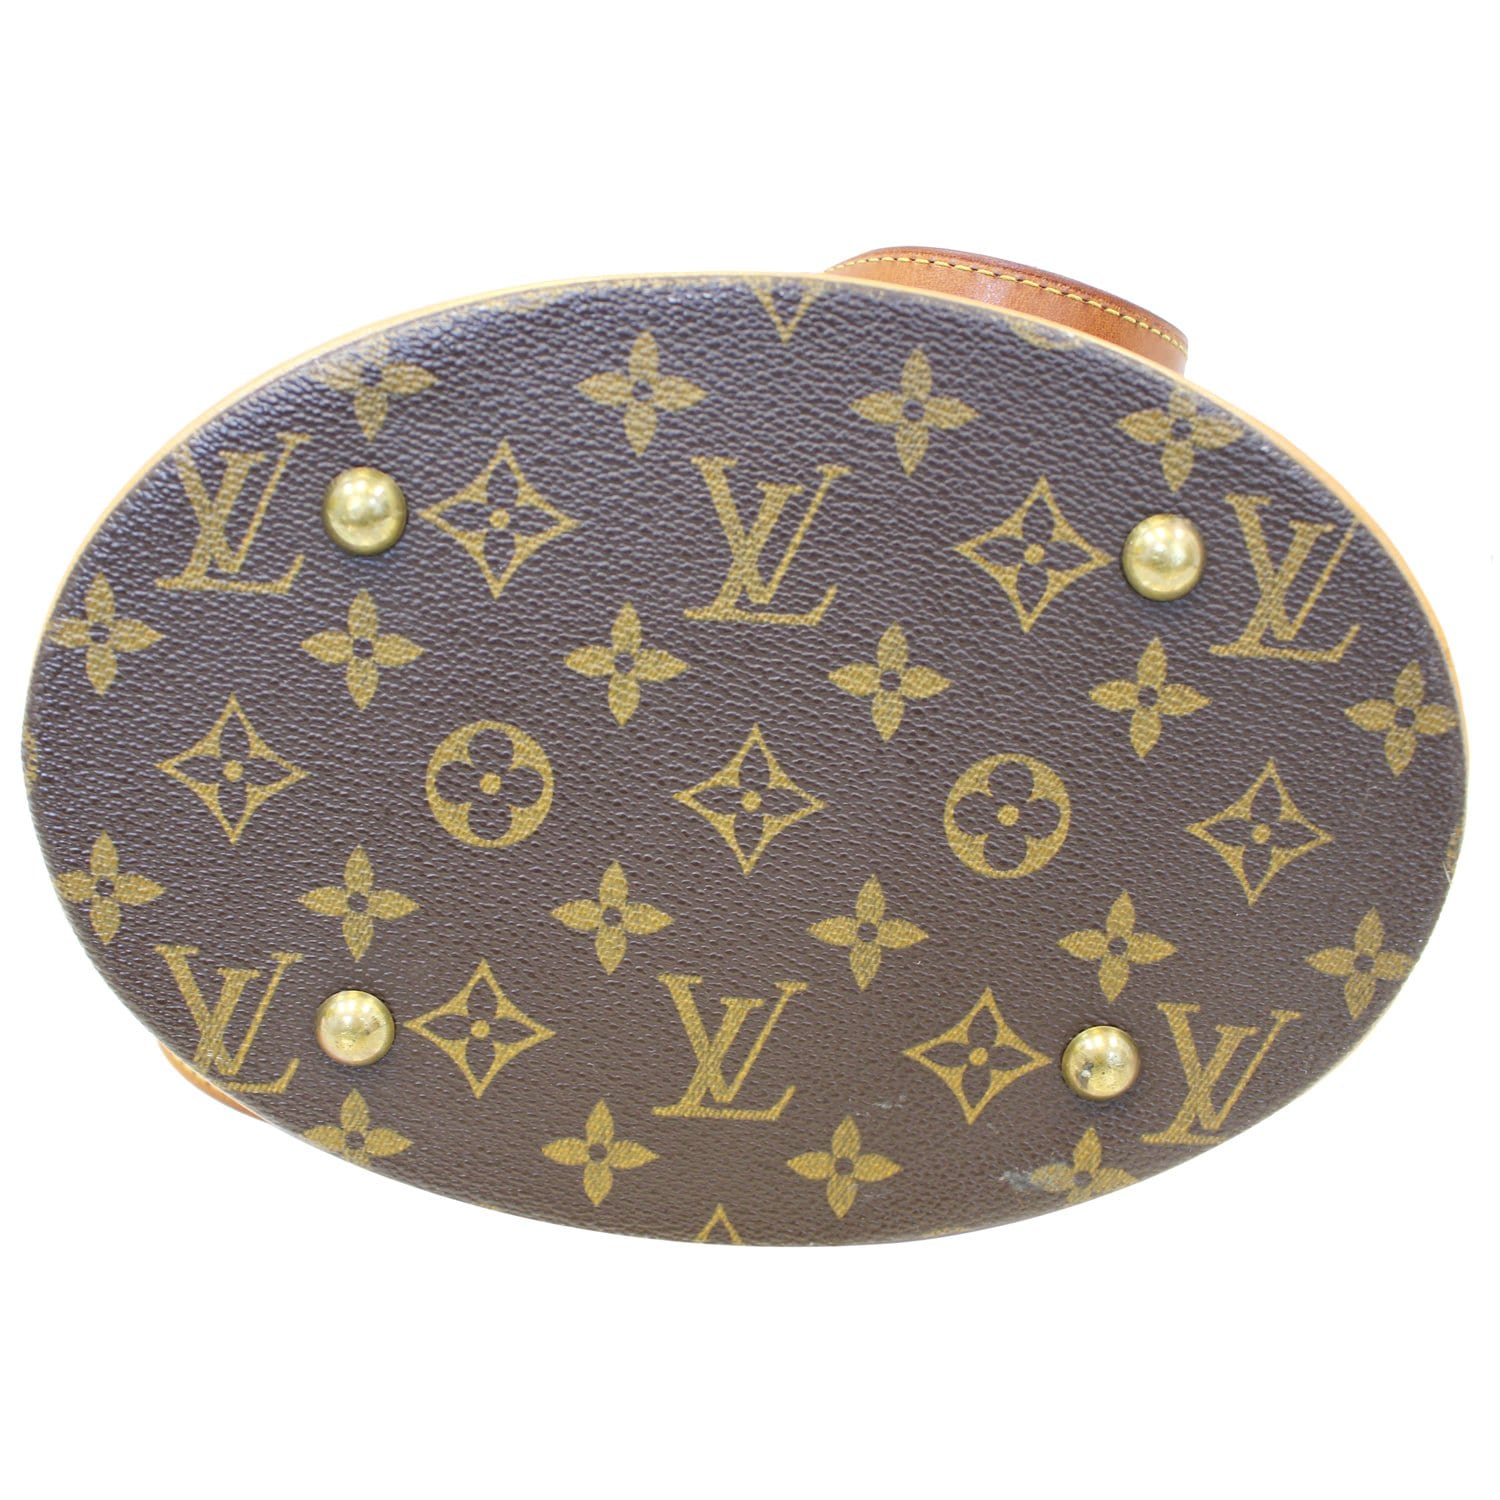 LOUIS VUITTON ルイヴィトン バケットPM M42238の買取実績